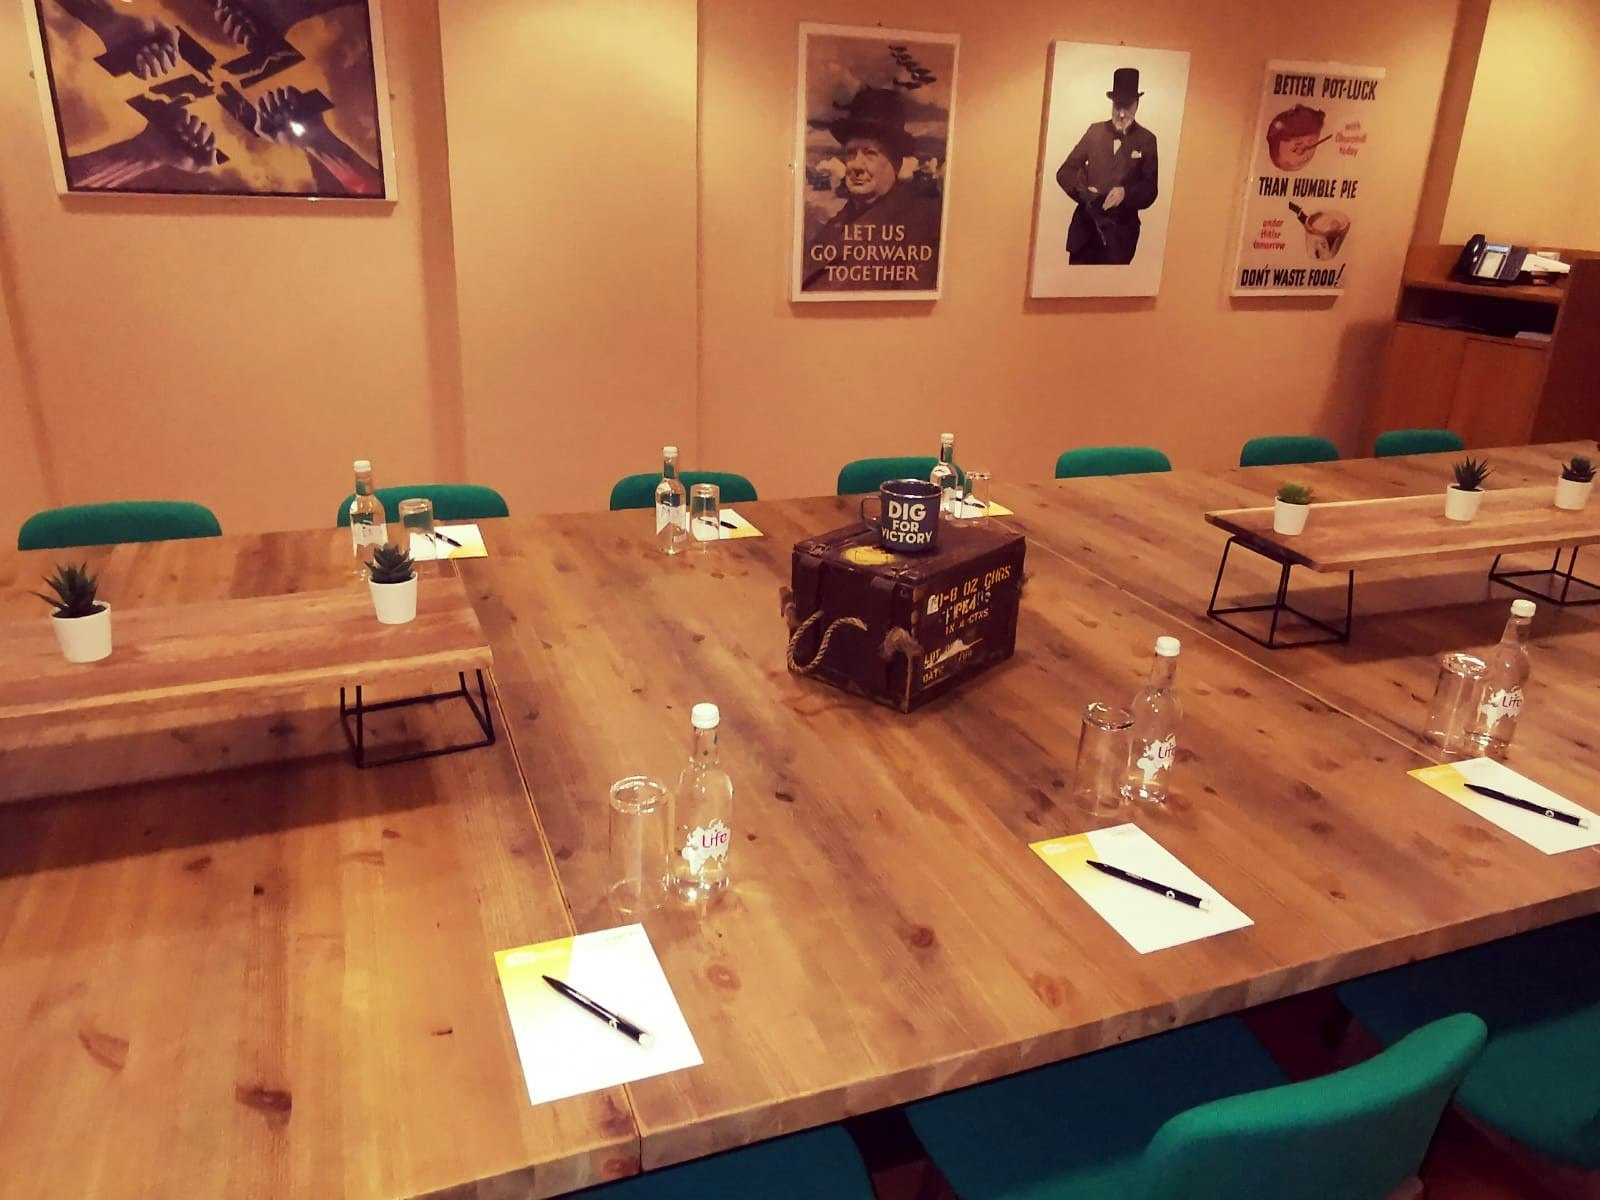 Churchill War Rooms - The Learning Room image 1